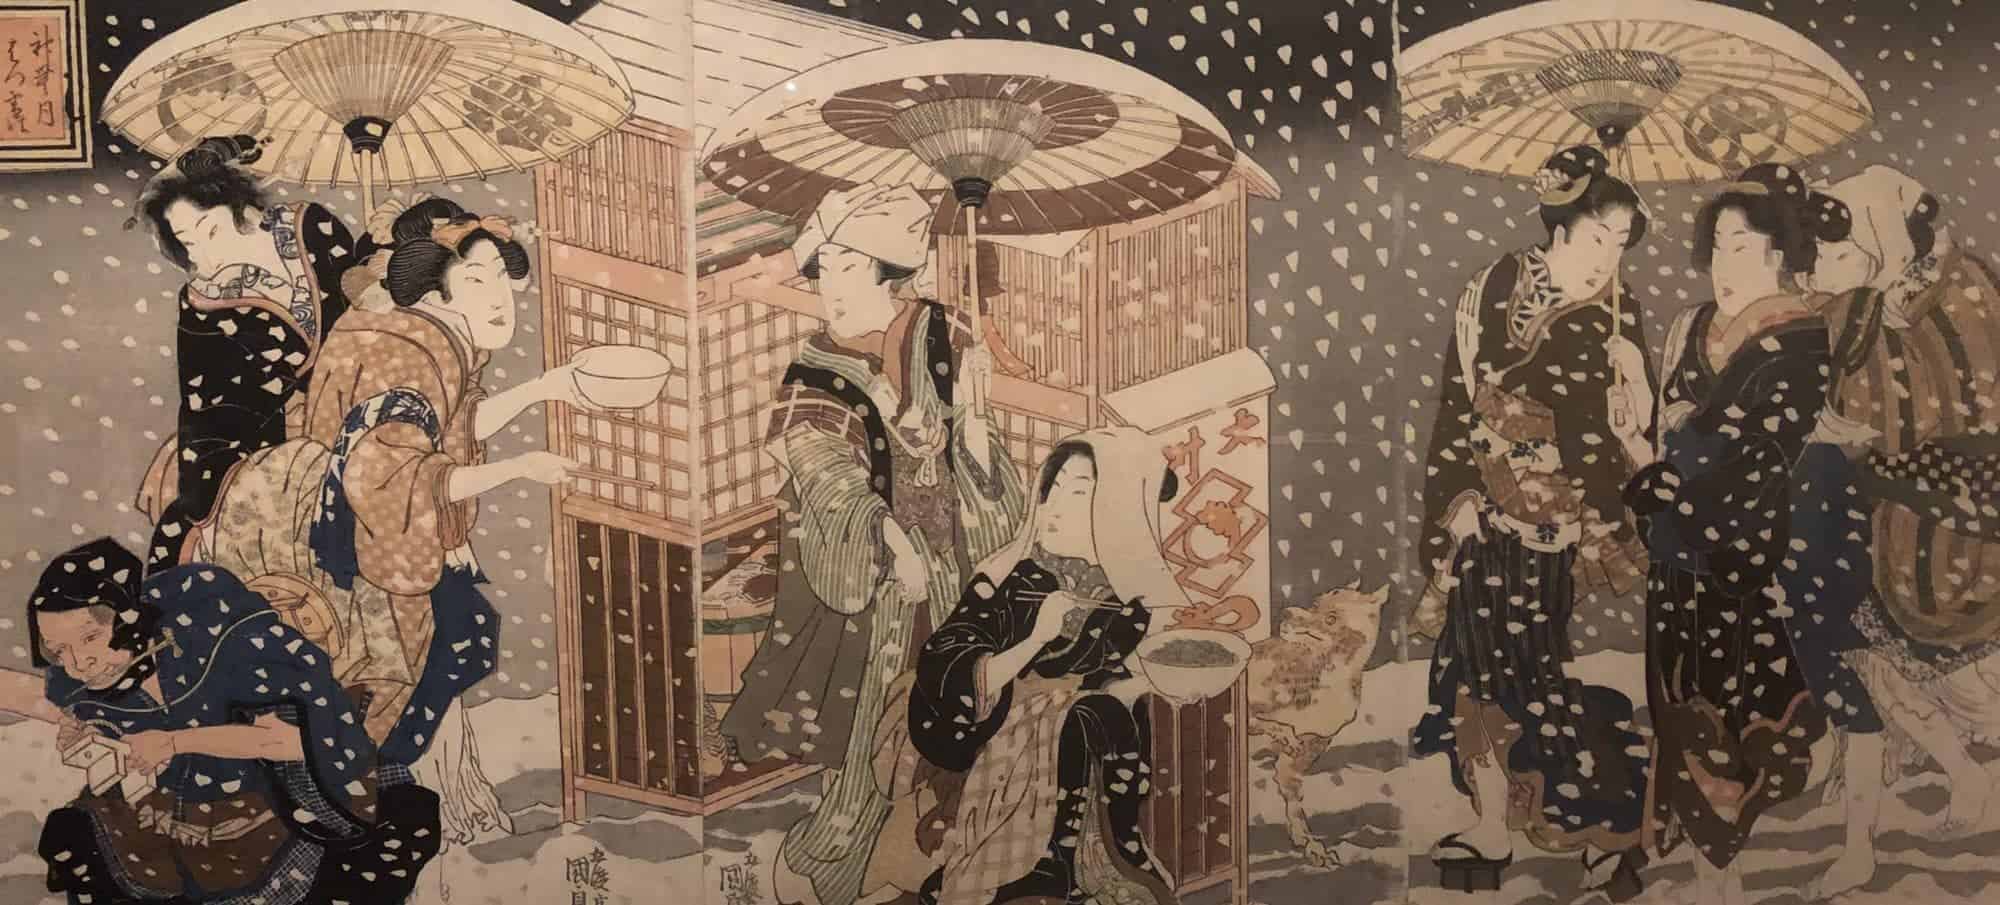 The Tenth Month: Streetwalkers in the First Snowfall,by Utagawa Kunisada